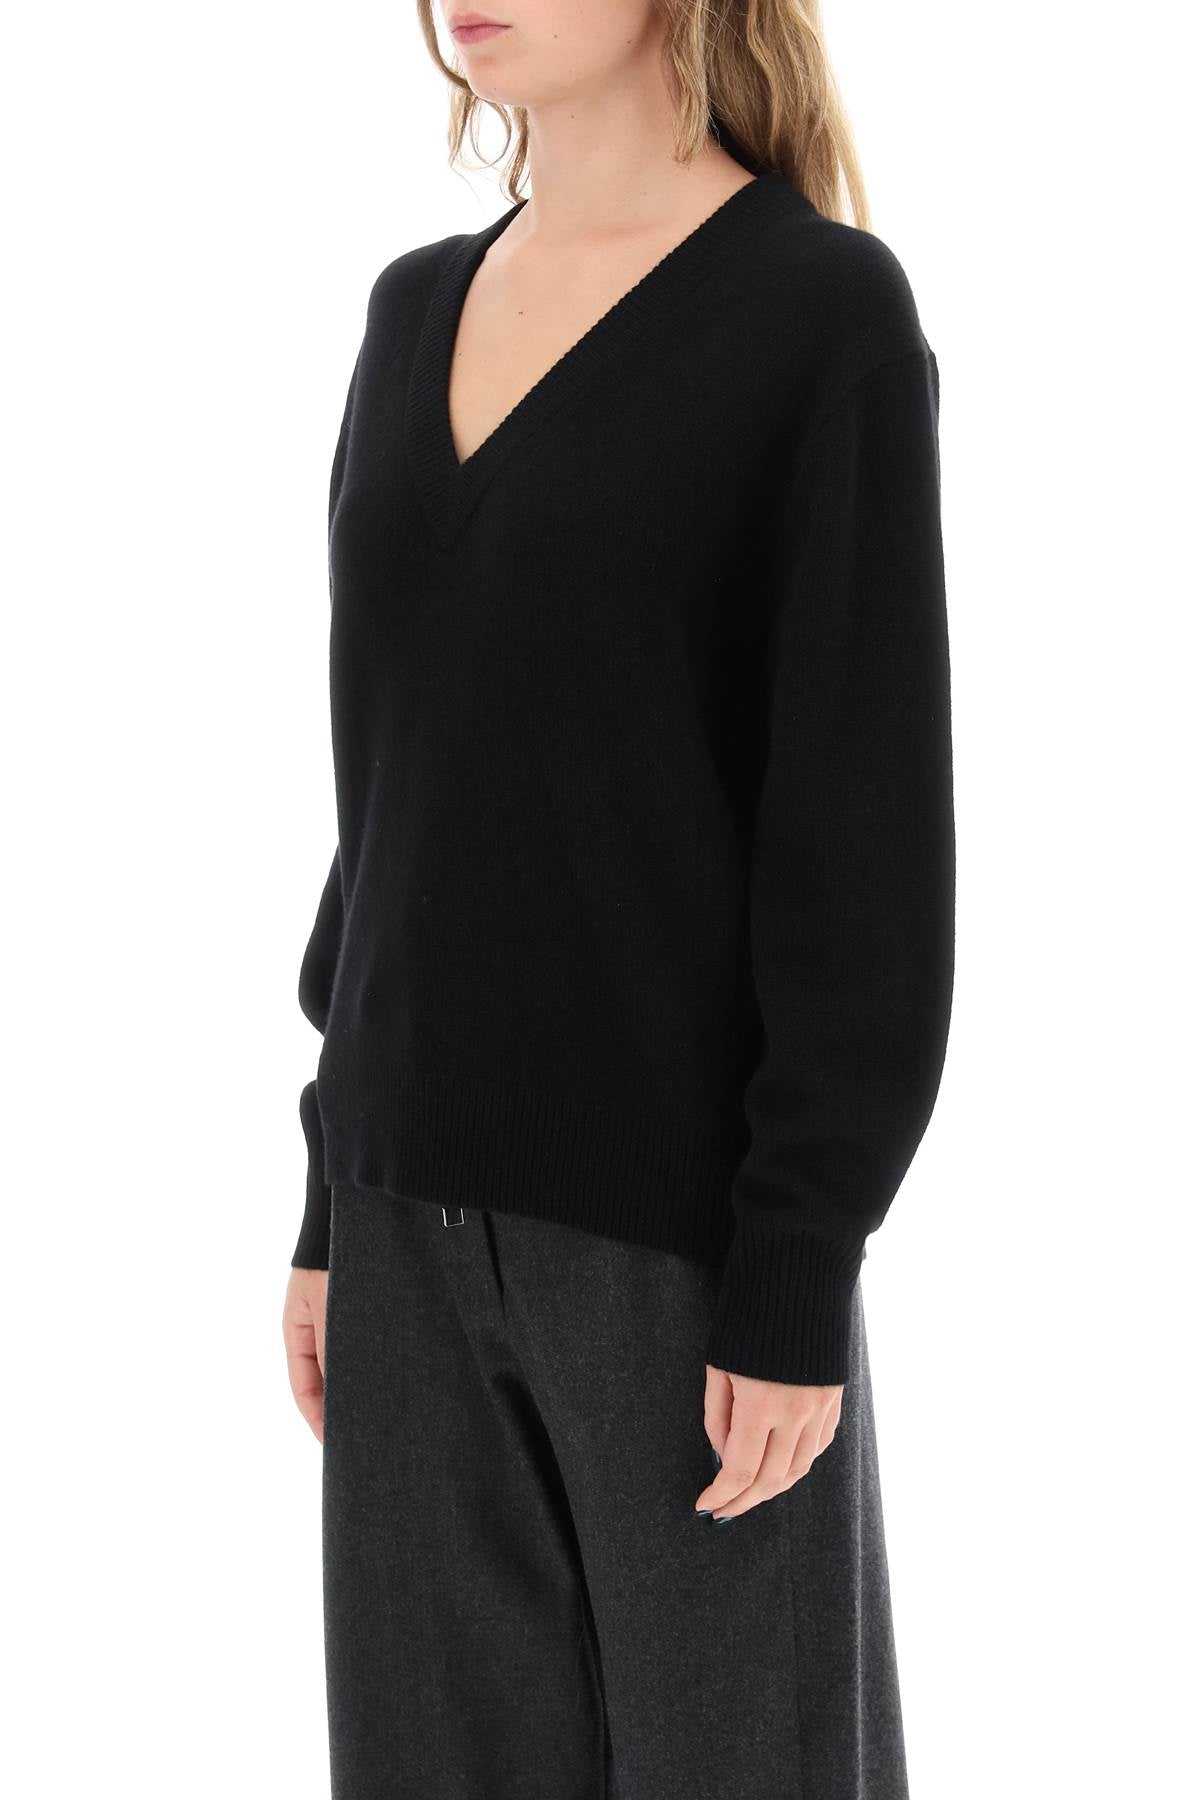 Guest in residence the v cashmere sweater-3